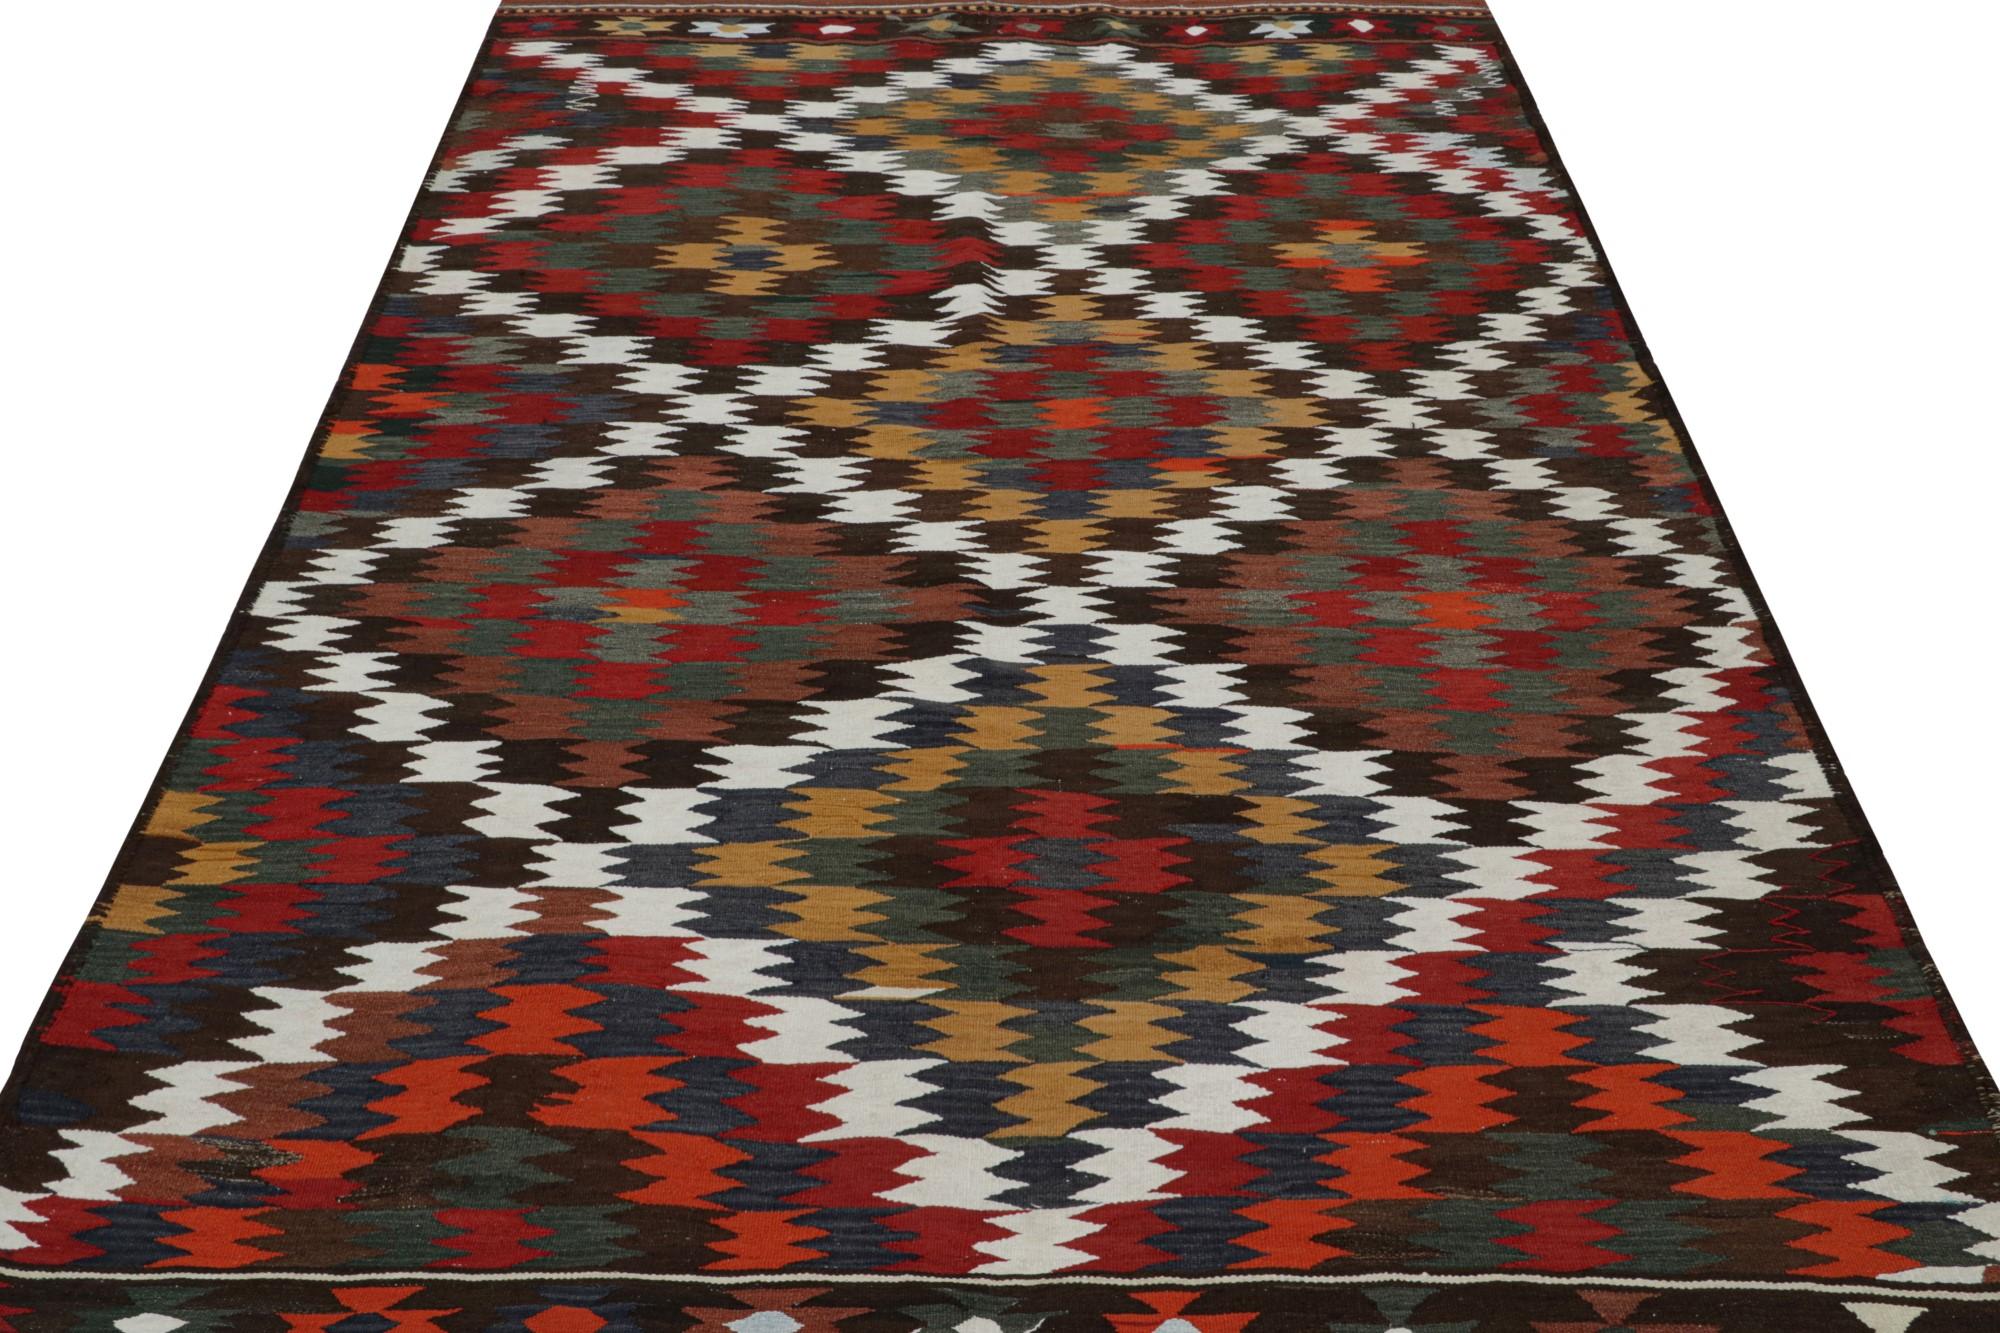 Hand-Knotted Vintage Afghan Tribal Kilim Rug, with Geometric Patterns, from Rug & Kilim  For Sale